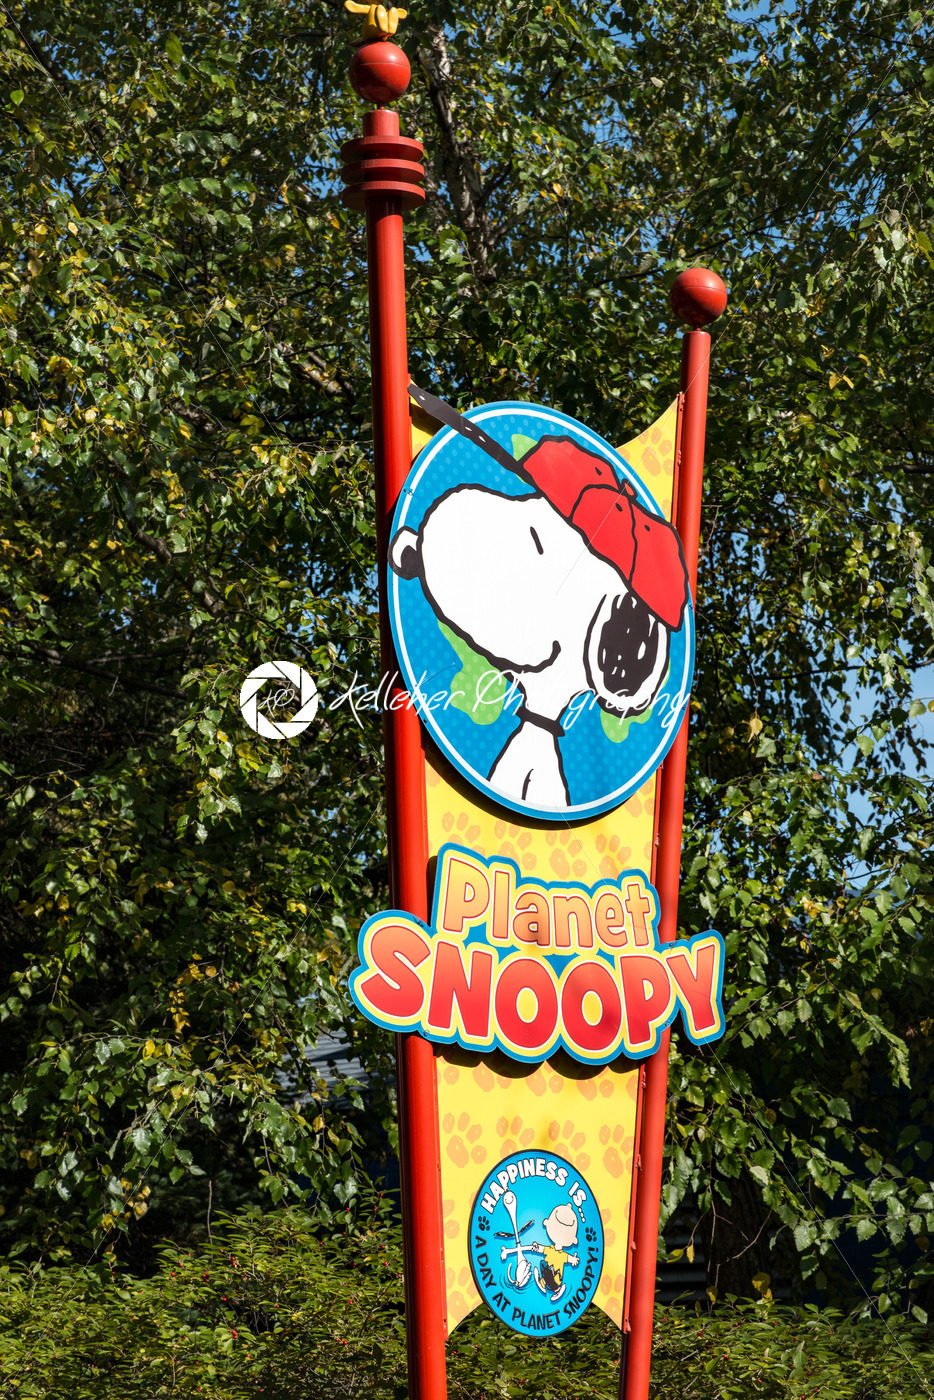 ALLENTOWN, PA – OCTOBER 22: Planet Snoopy at Dorney Park in Allentown, Pennsylvania - Kelleher Photography Store